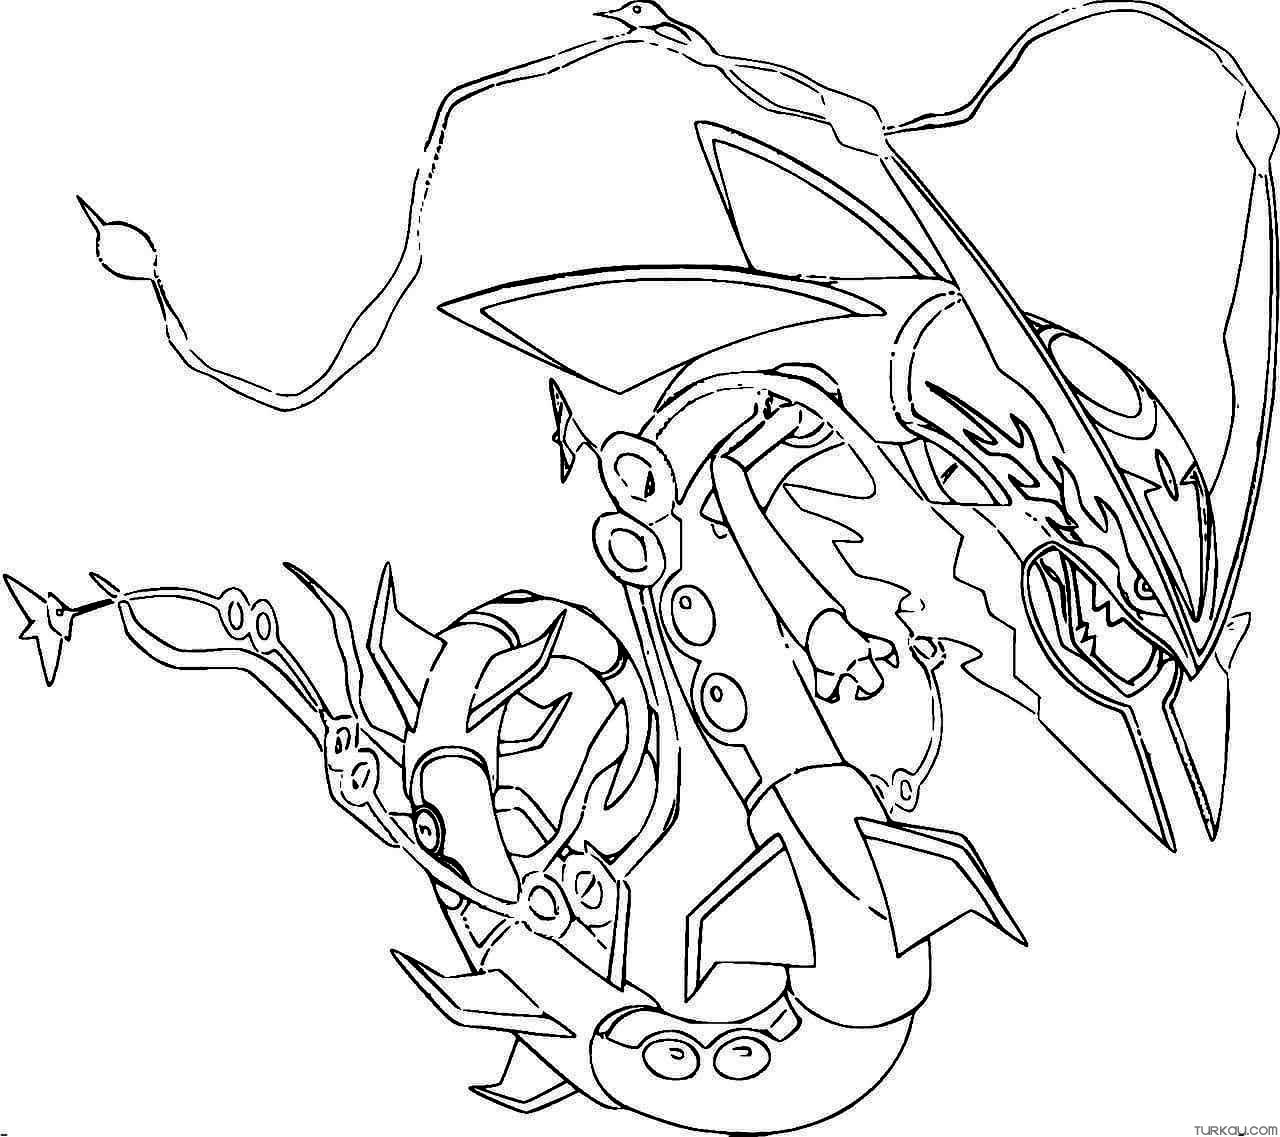 Rayquaza legendary pokemon coloring page